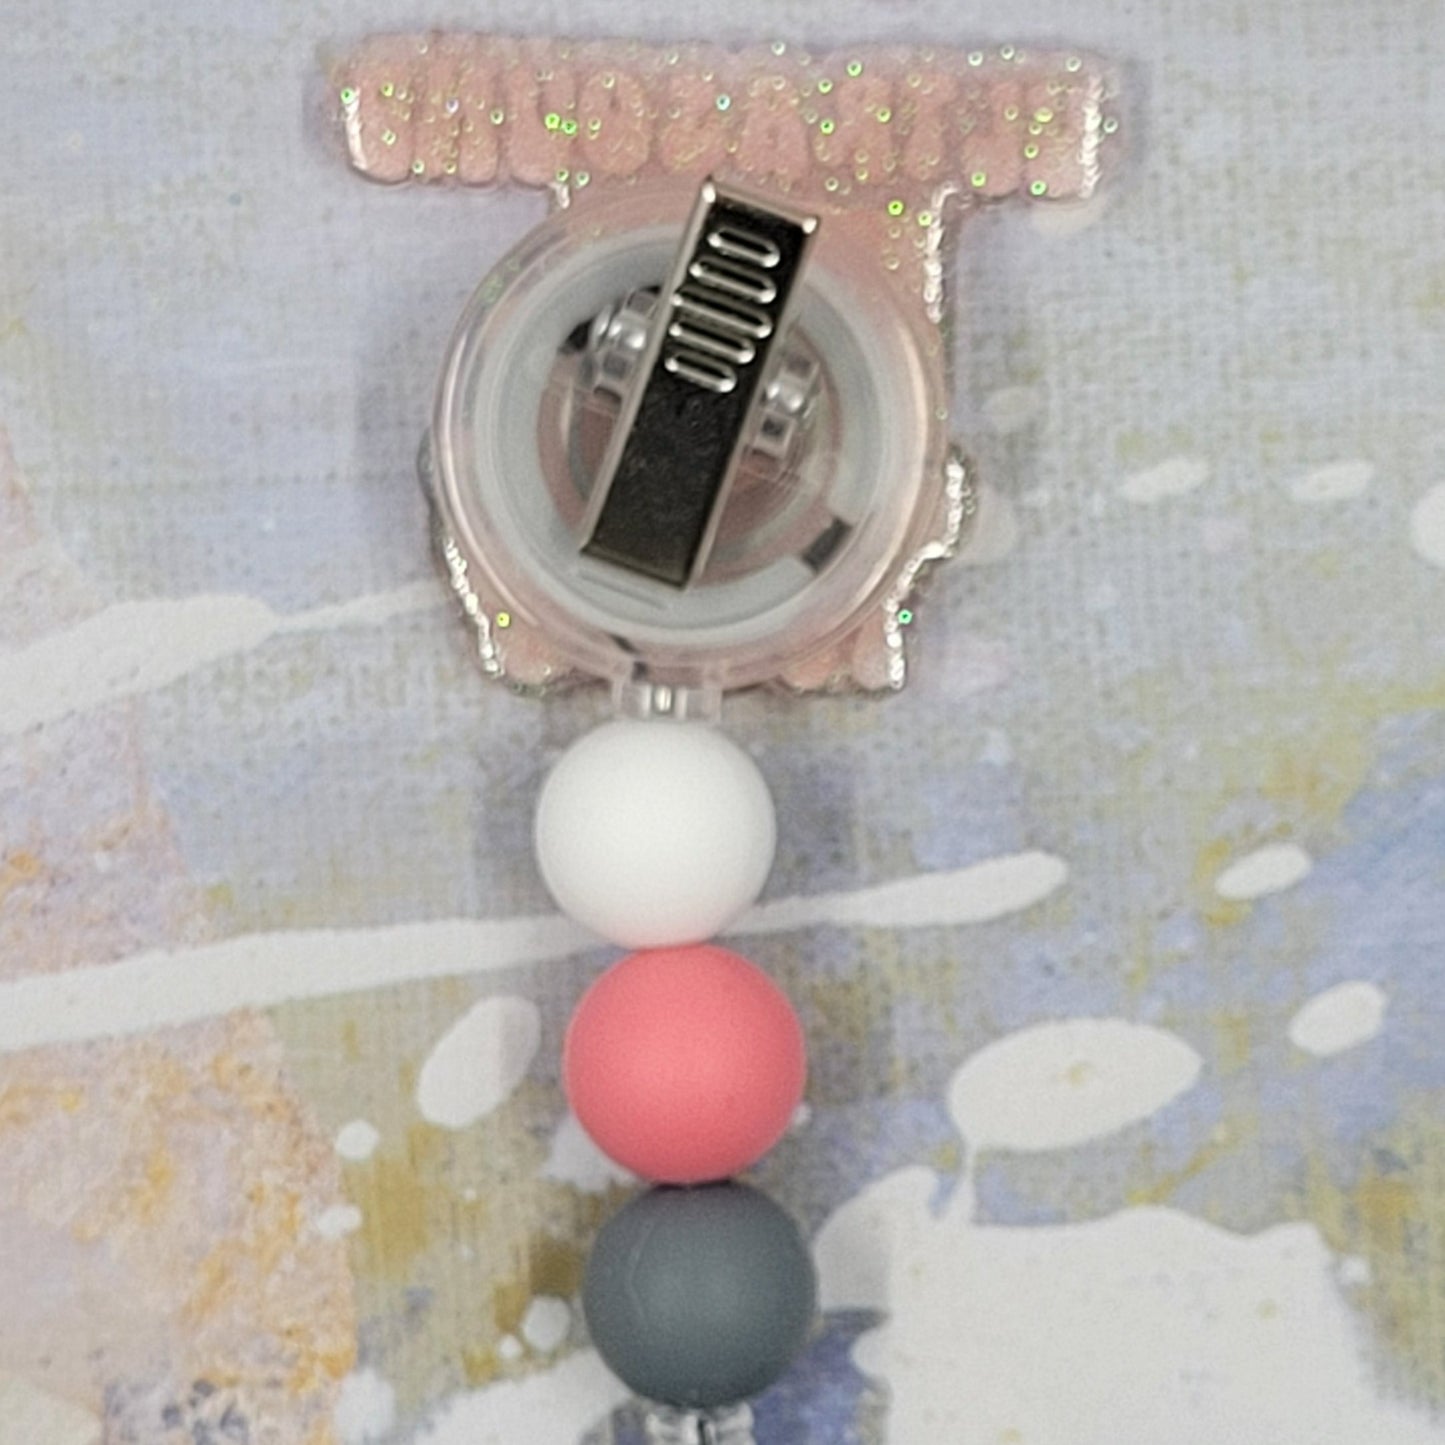 Introducing the new Ultrasound Tech Badge Reel, part of our latest collection of Medical Badge Reels available now. Featuring Ultrasound Tech in pink lettering and an ultrasound machine over a clears glitter base finished with coordinating beads, this Badge Reel is sure to catch the eye.